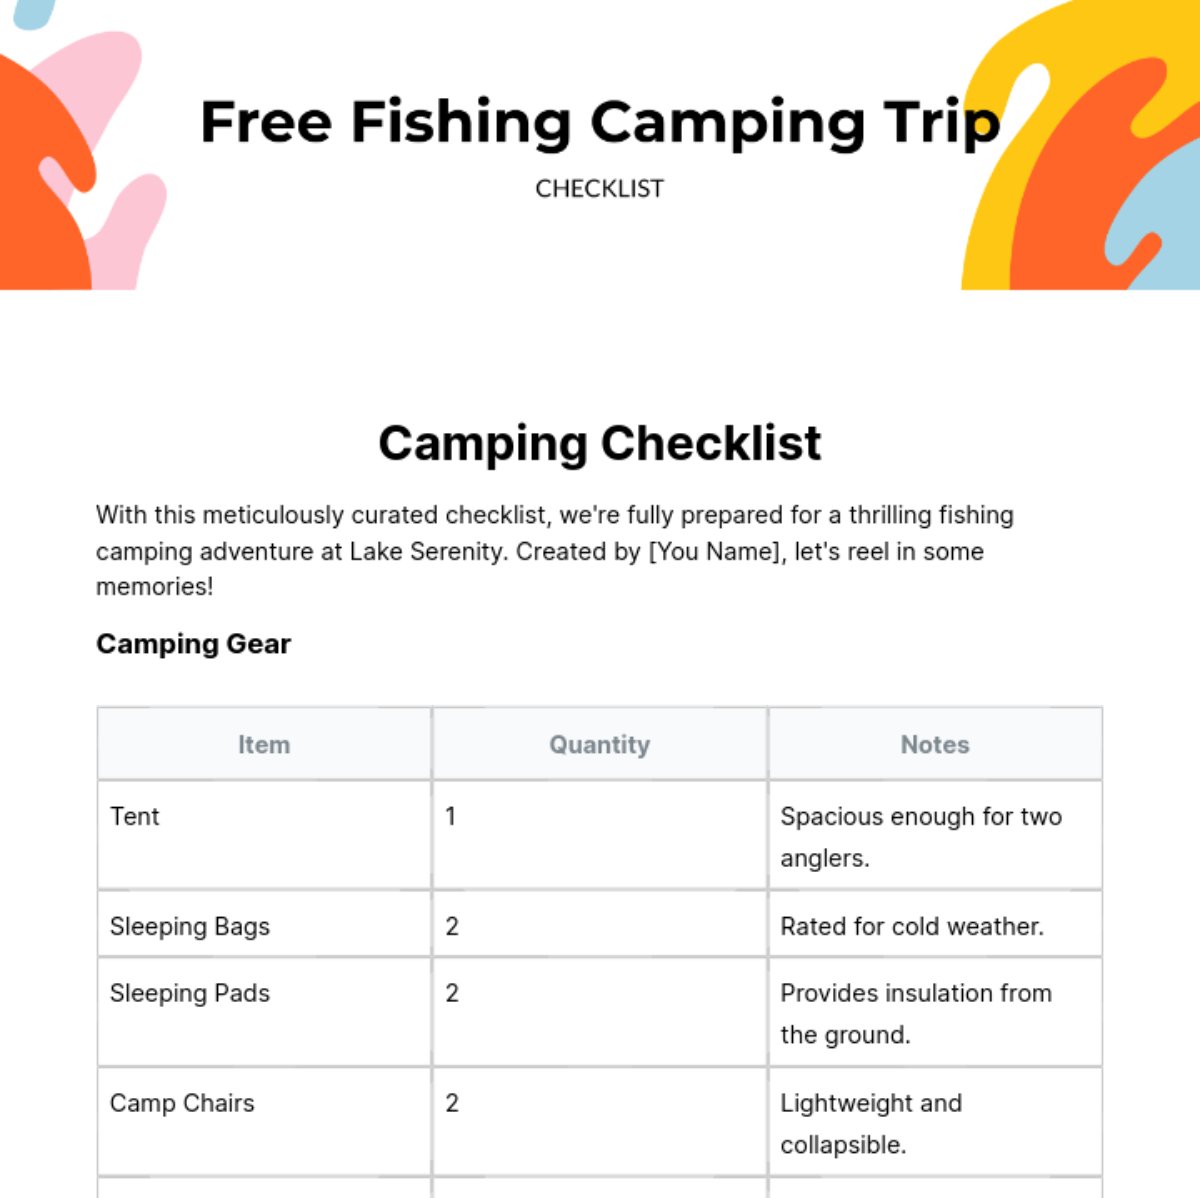 Fishing Camping Trip Checklist Template - Edit Online & Download